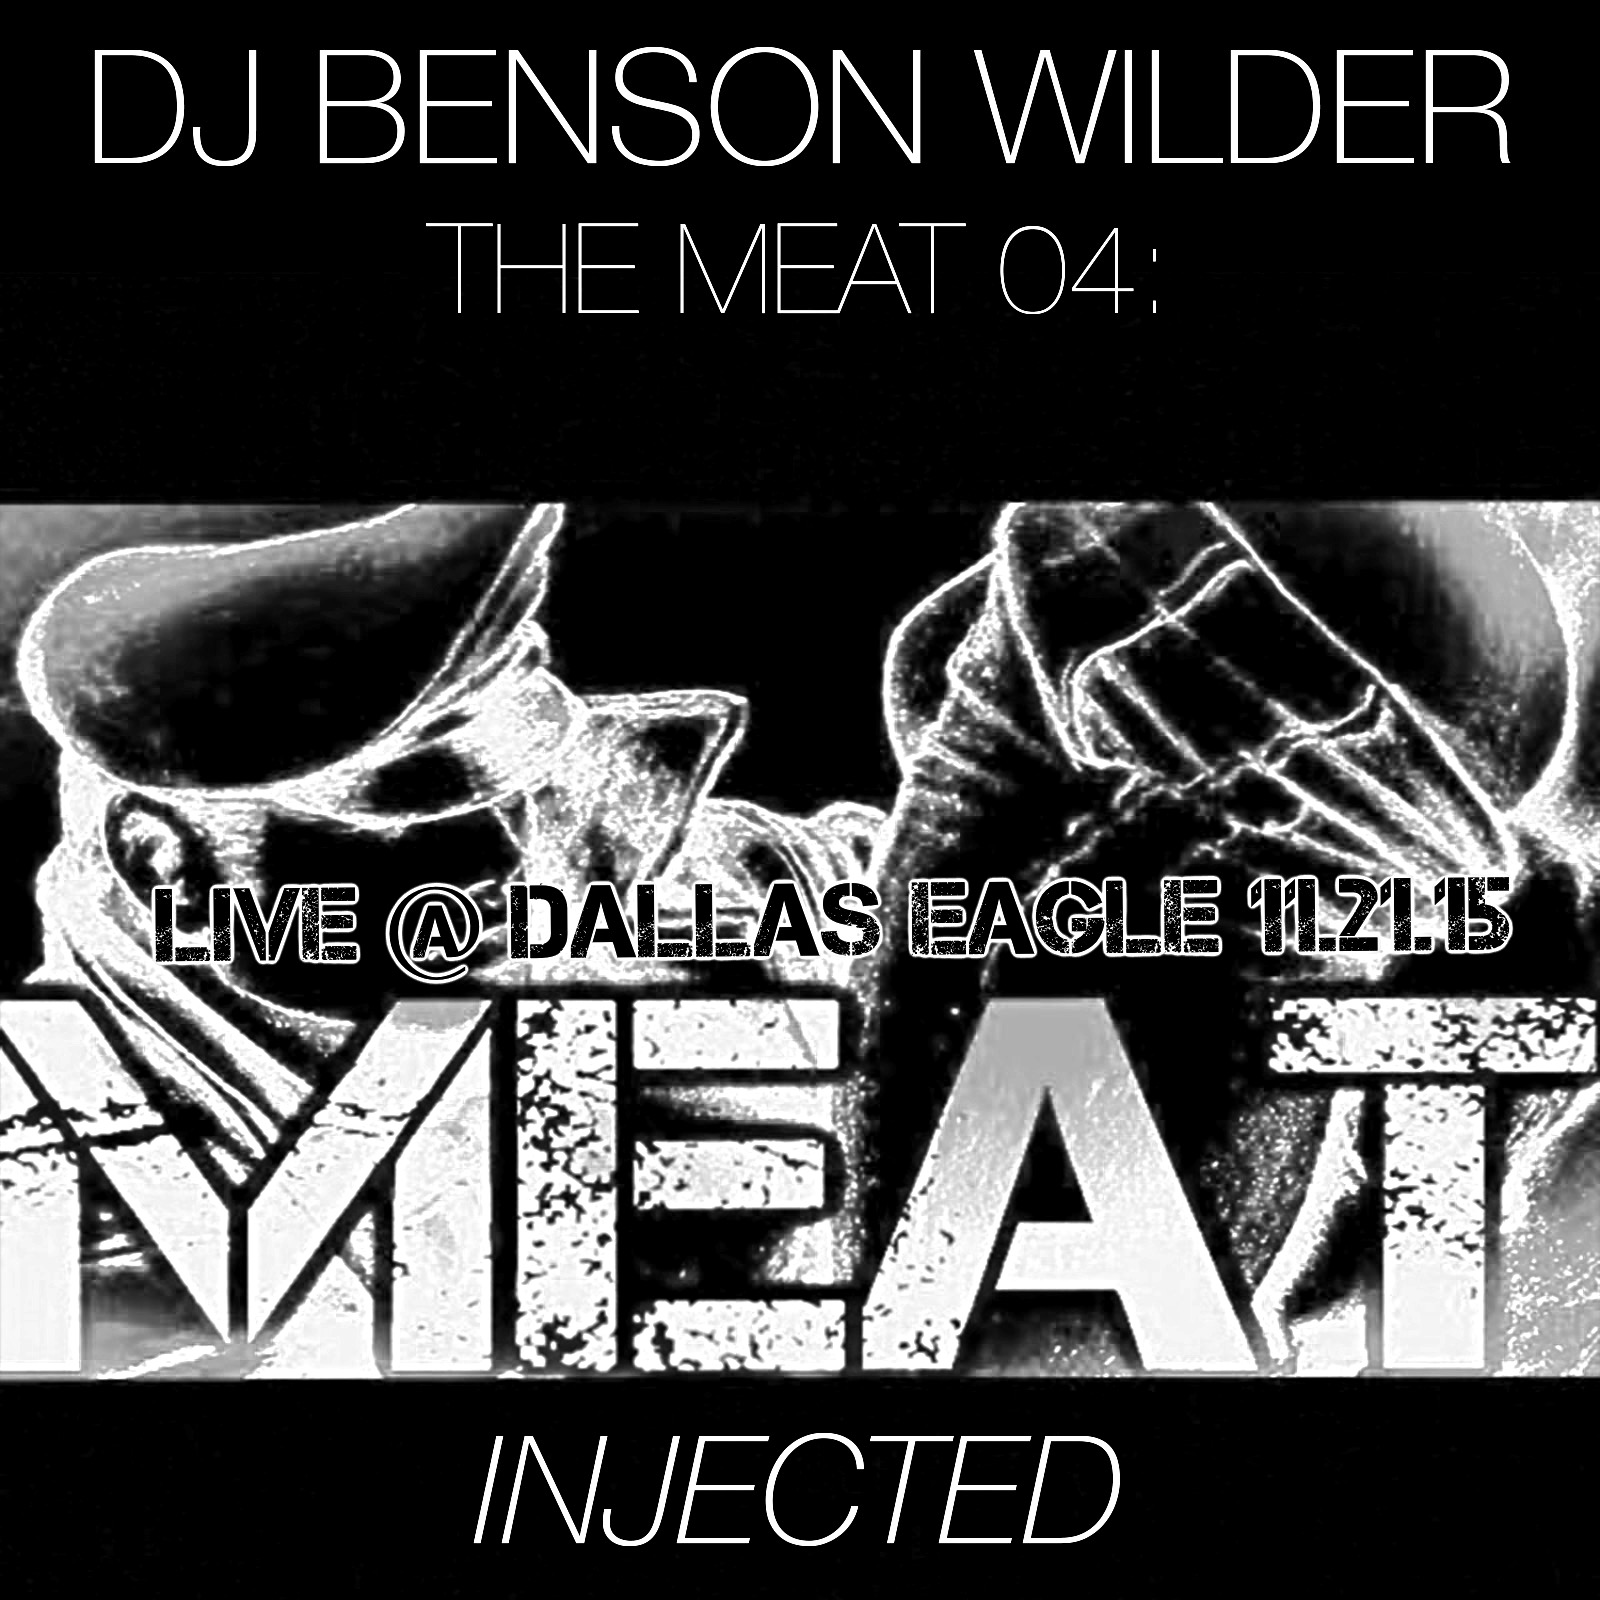 INJECTED: THE MEAT 04 -November 2015